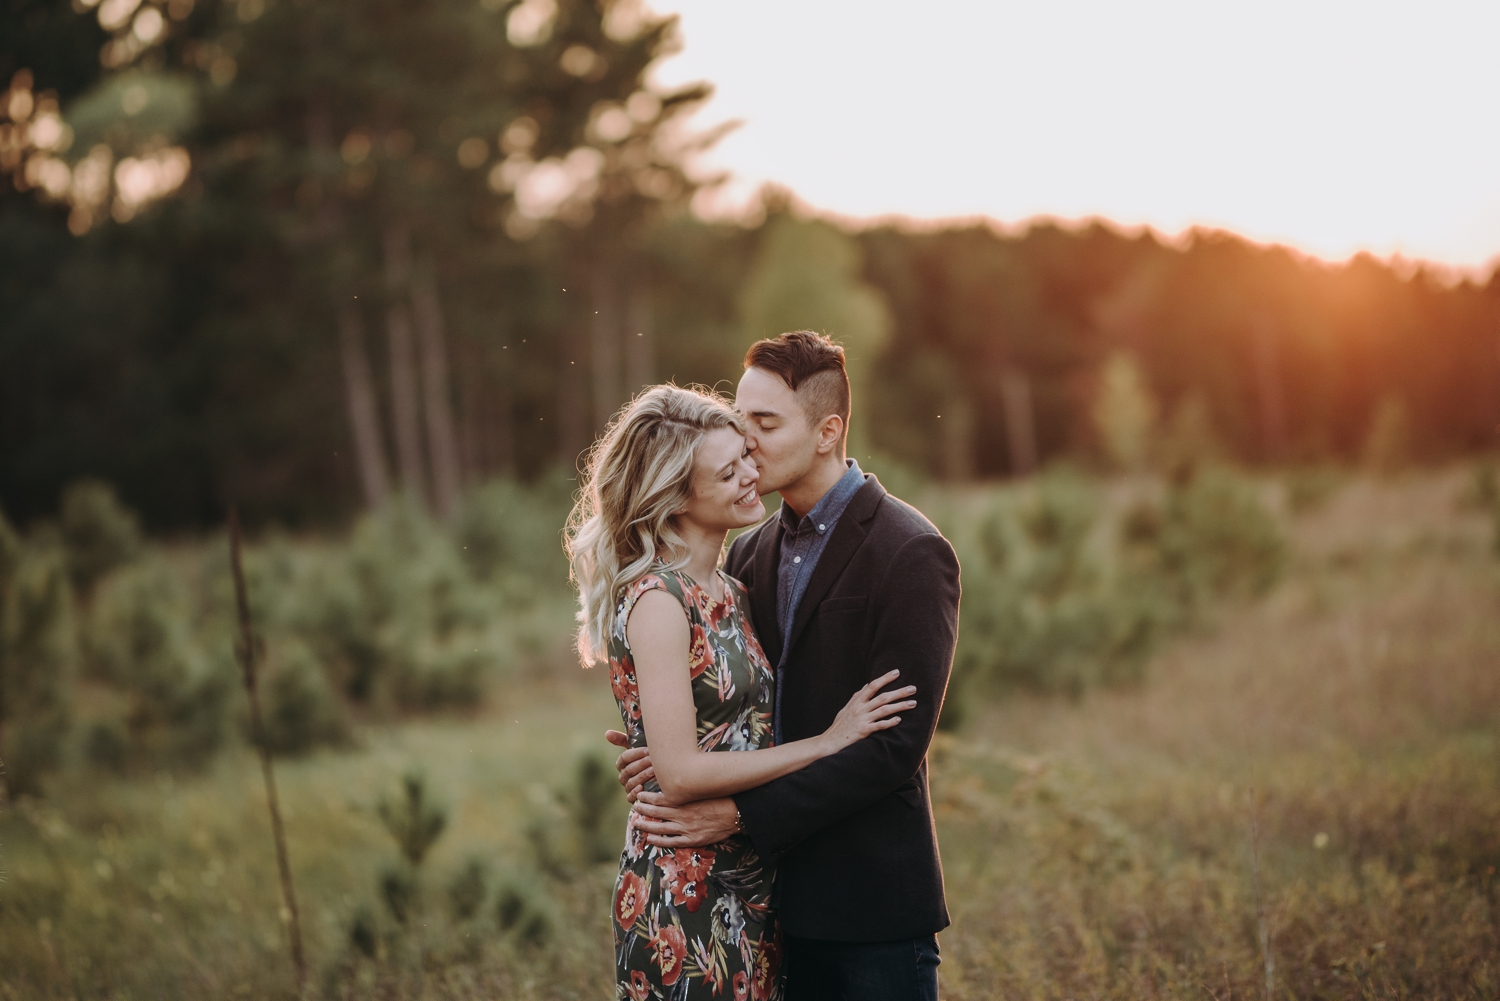 fall engagement photos in minnesota woods tom thornton photography